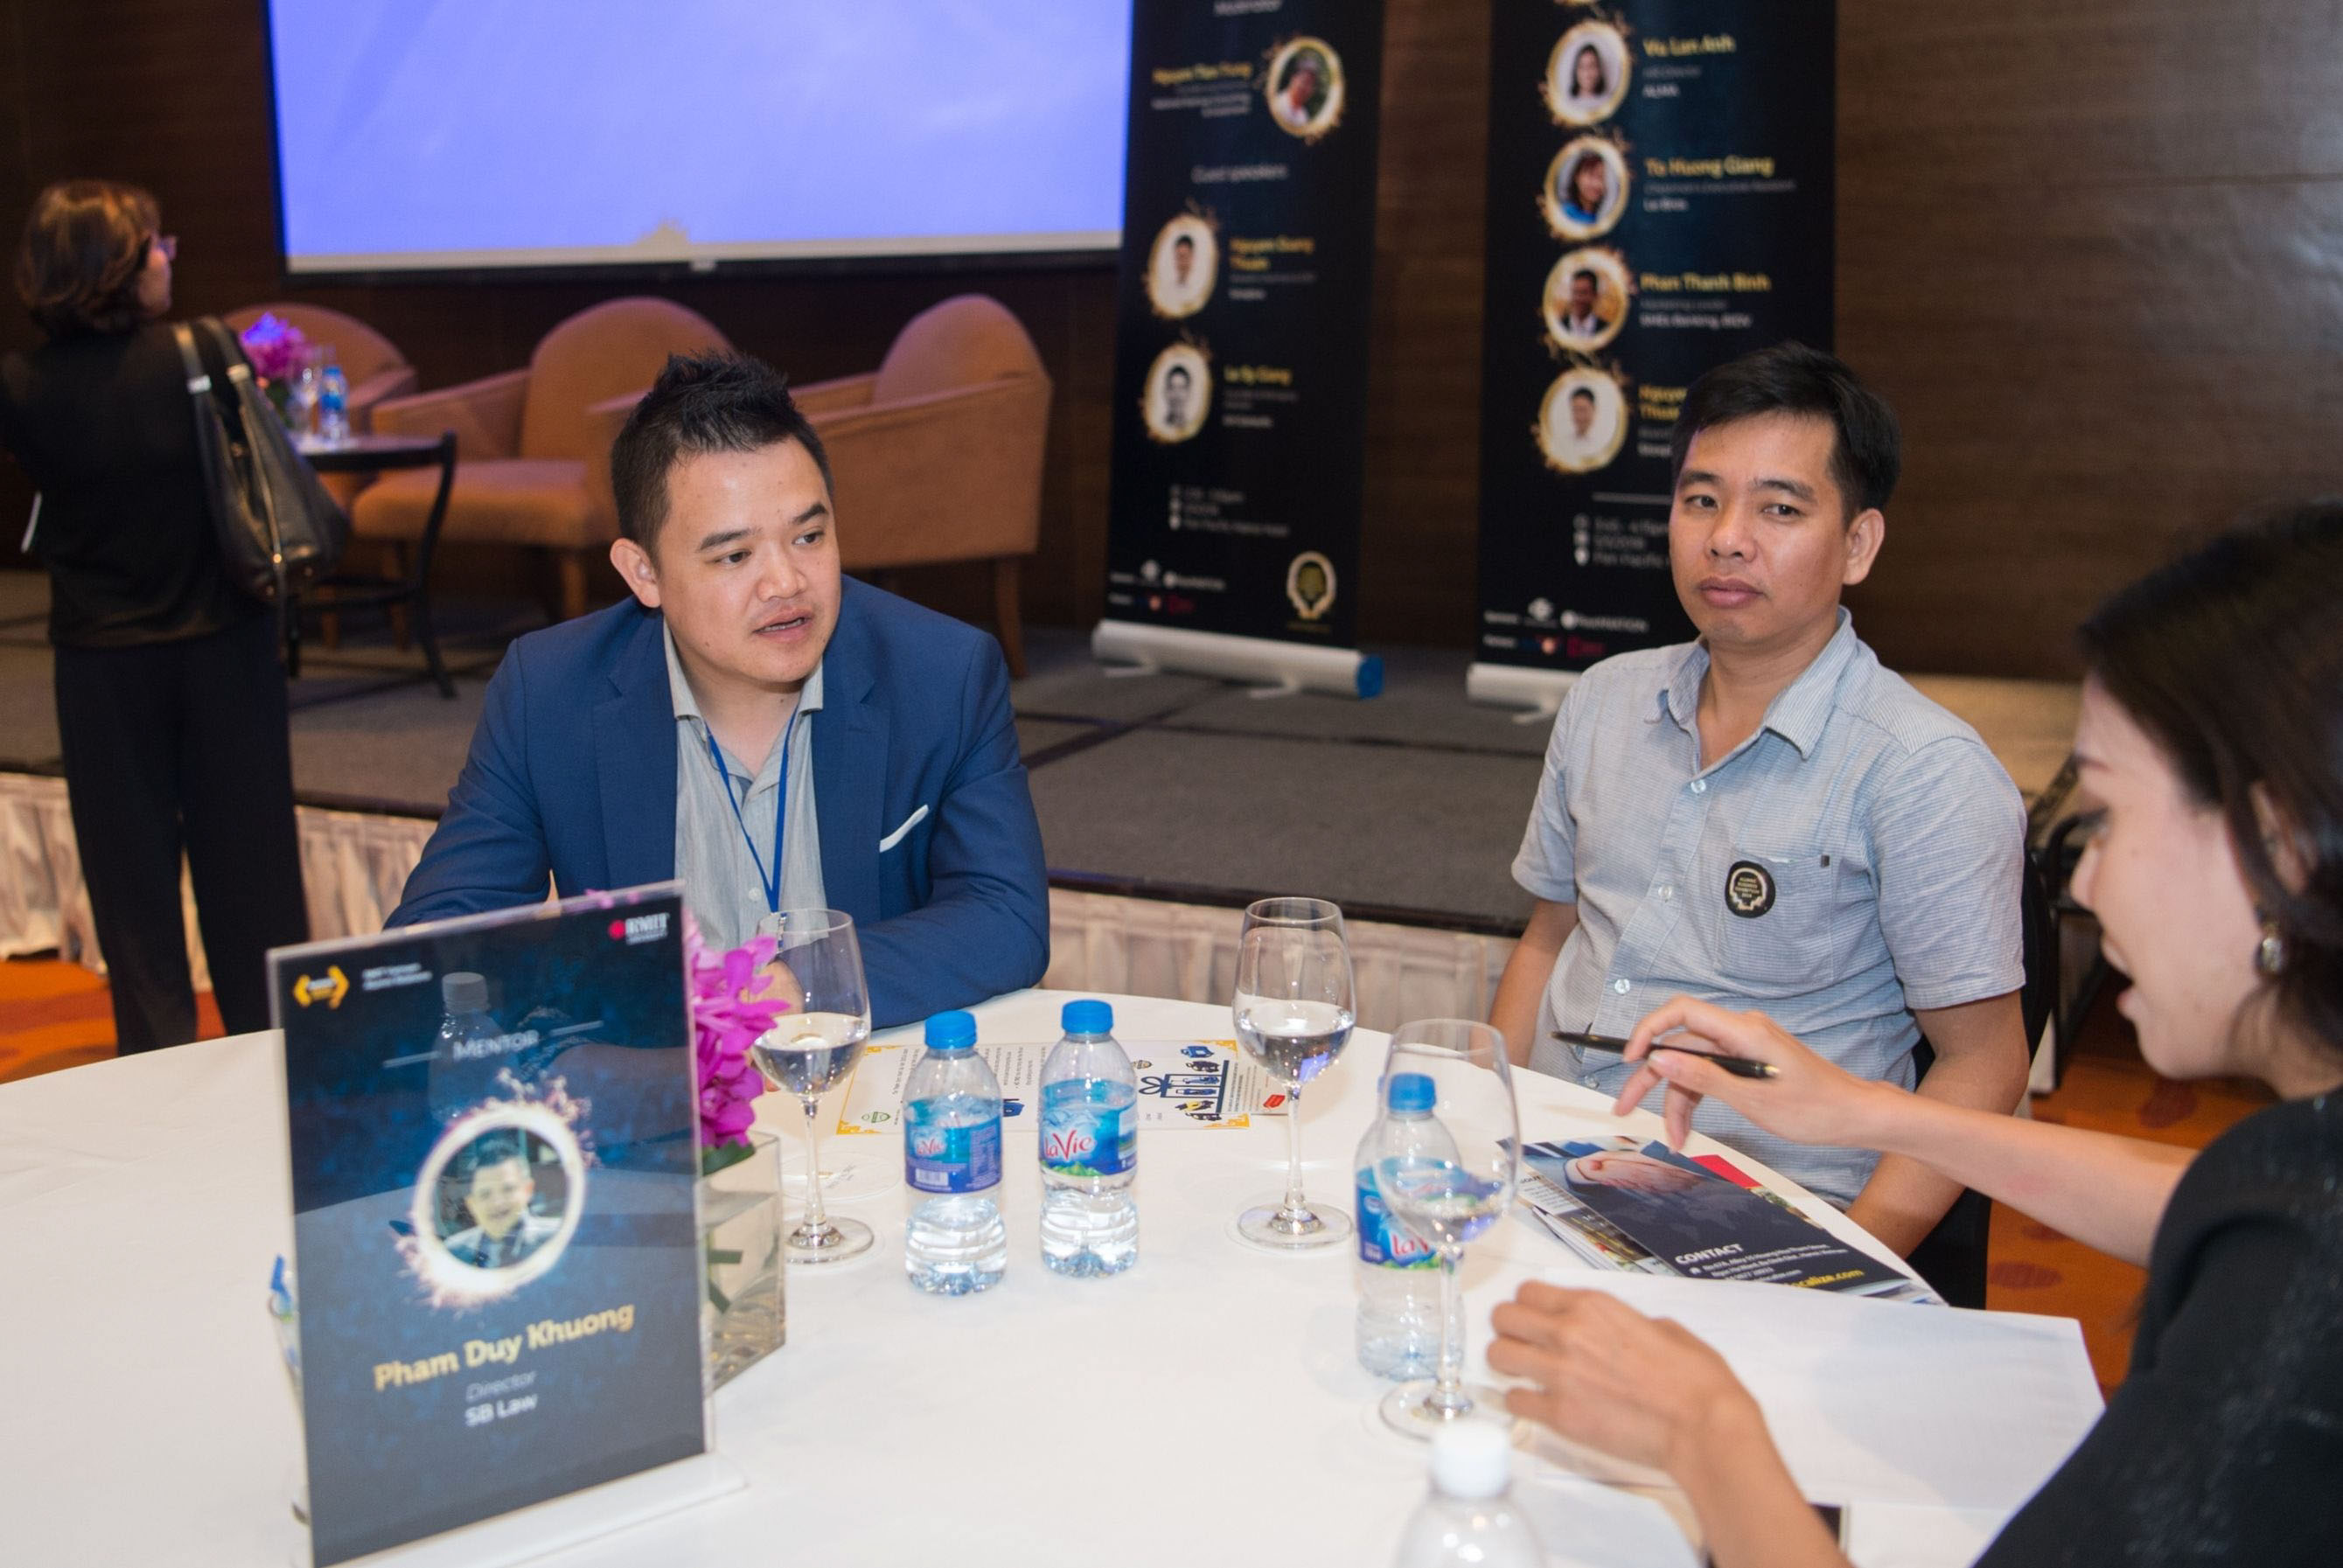 Pham Duy Khuong (left), Director of SB Law, shared his experience during a Express Mentoring session in Hanoi.